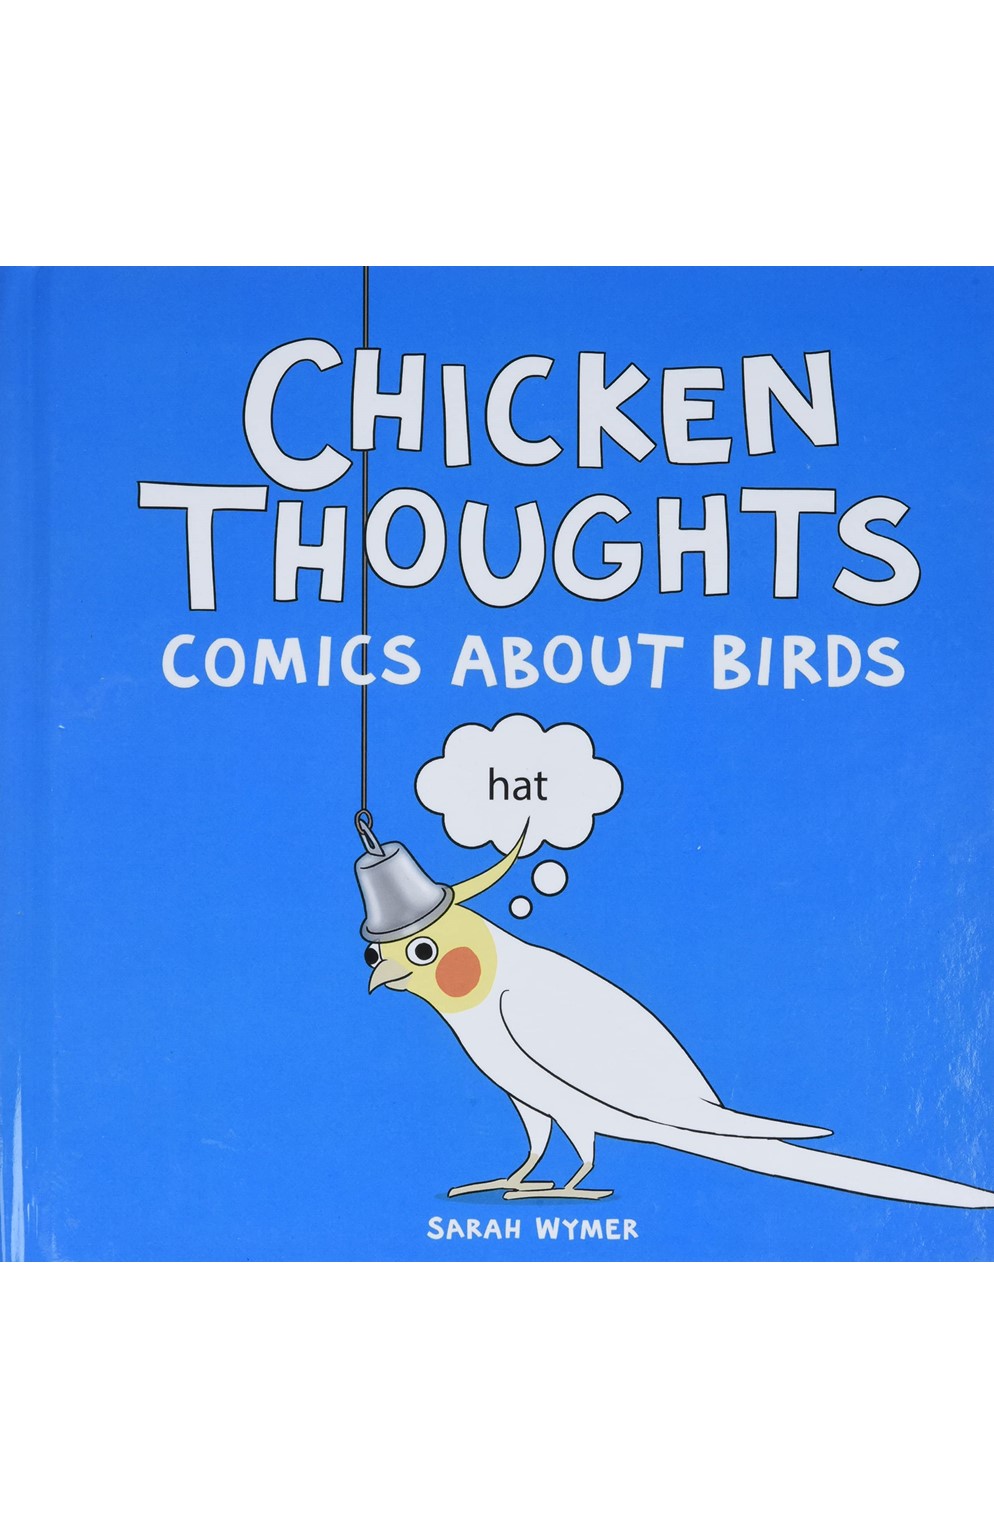 Chicken Thoughts Comics About Birds Hardcover Graphic Novel